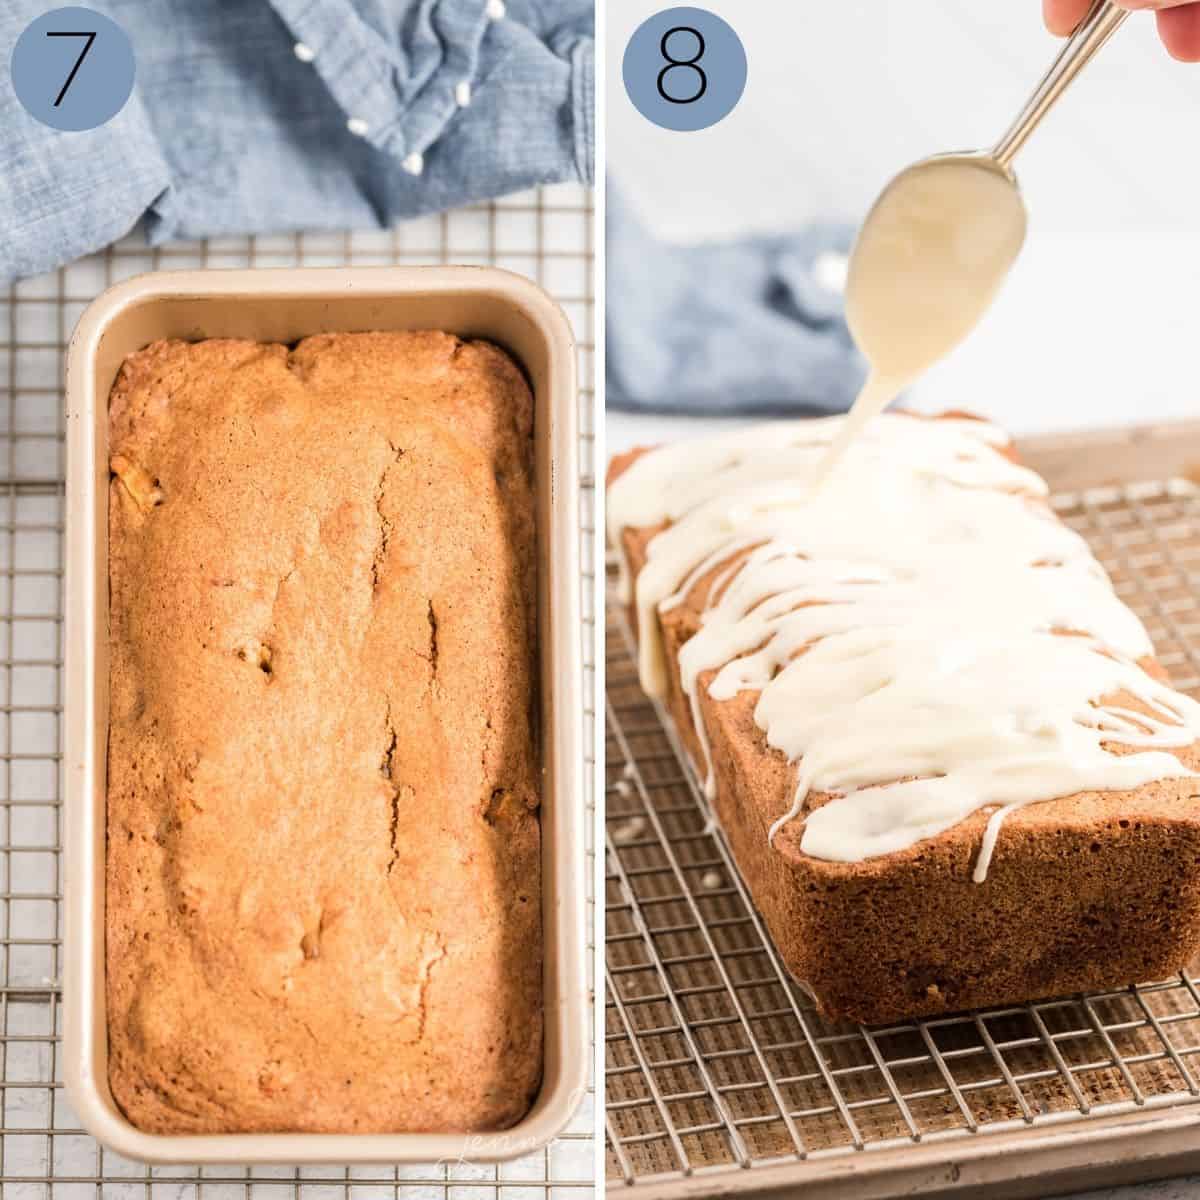 allowing the cinnamon apple bread to cool on a wire rack and then adding a vanilla glaze on top